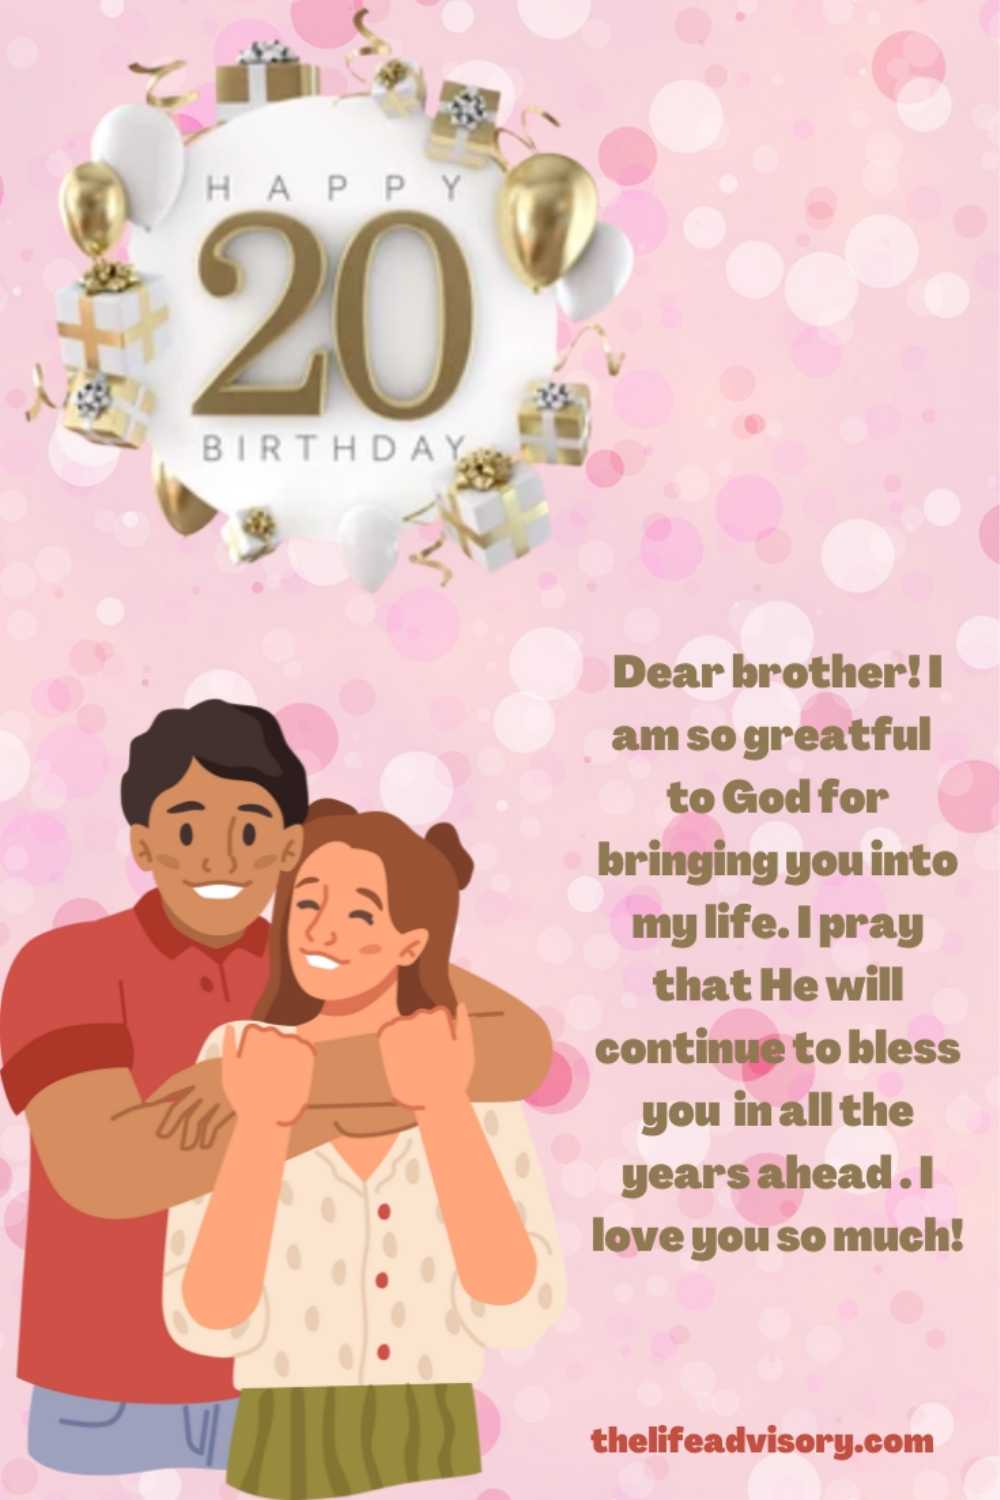 20th Birthday Wishes for Brother From Sister